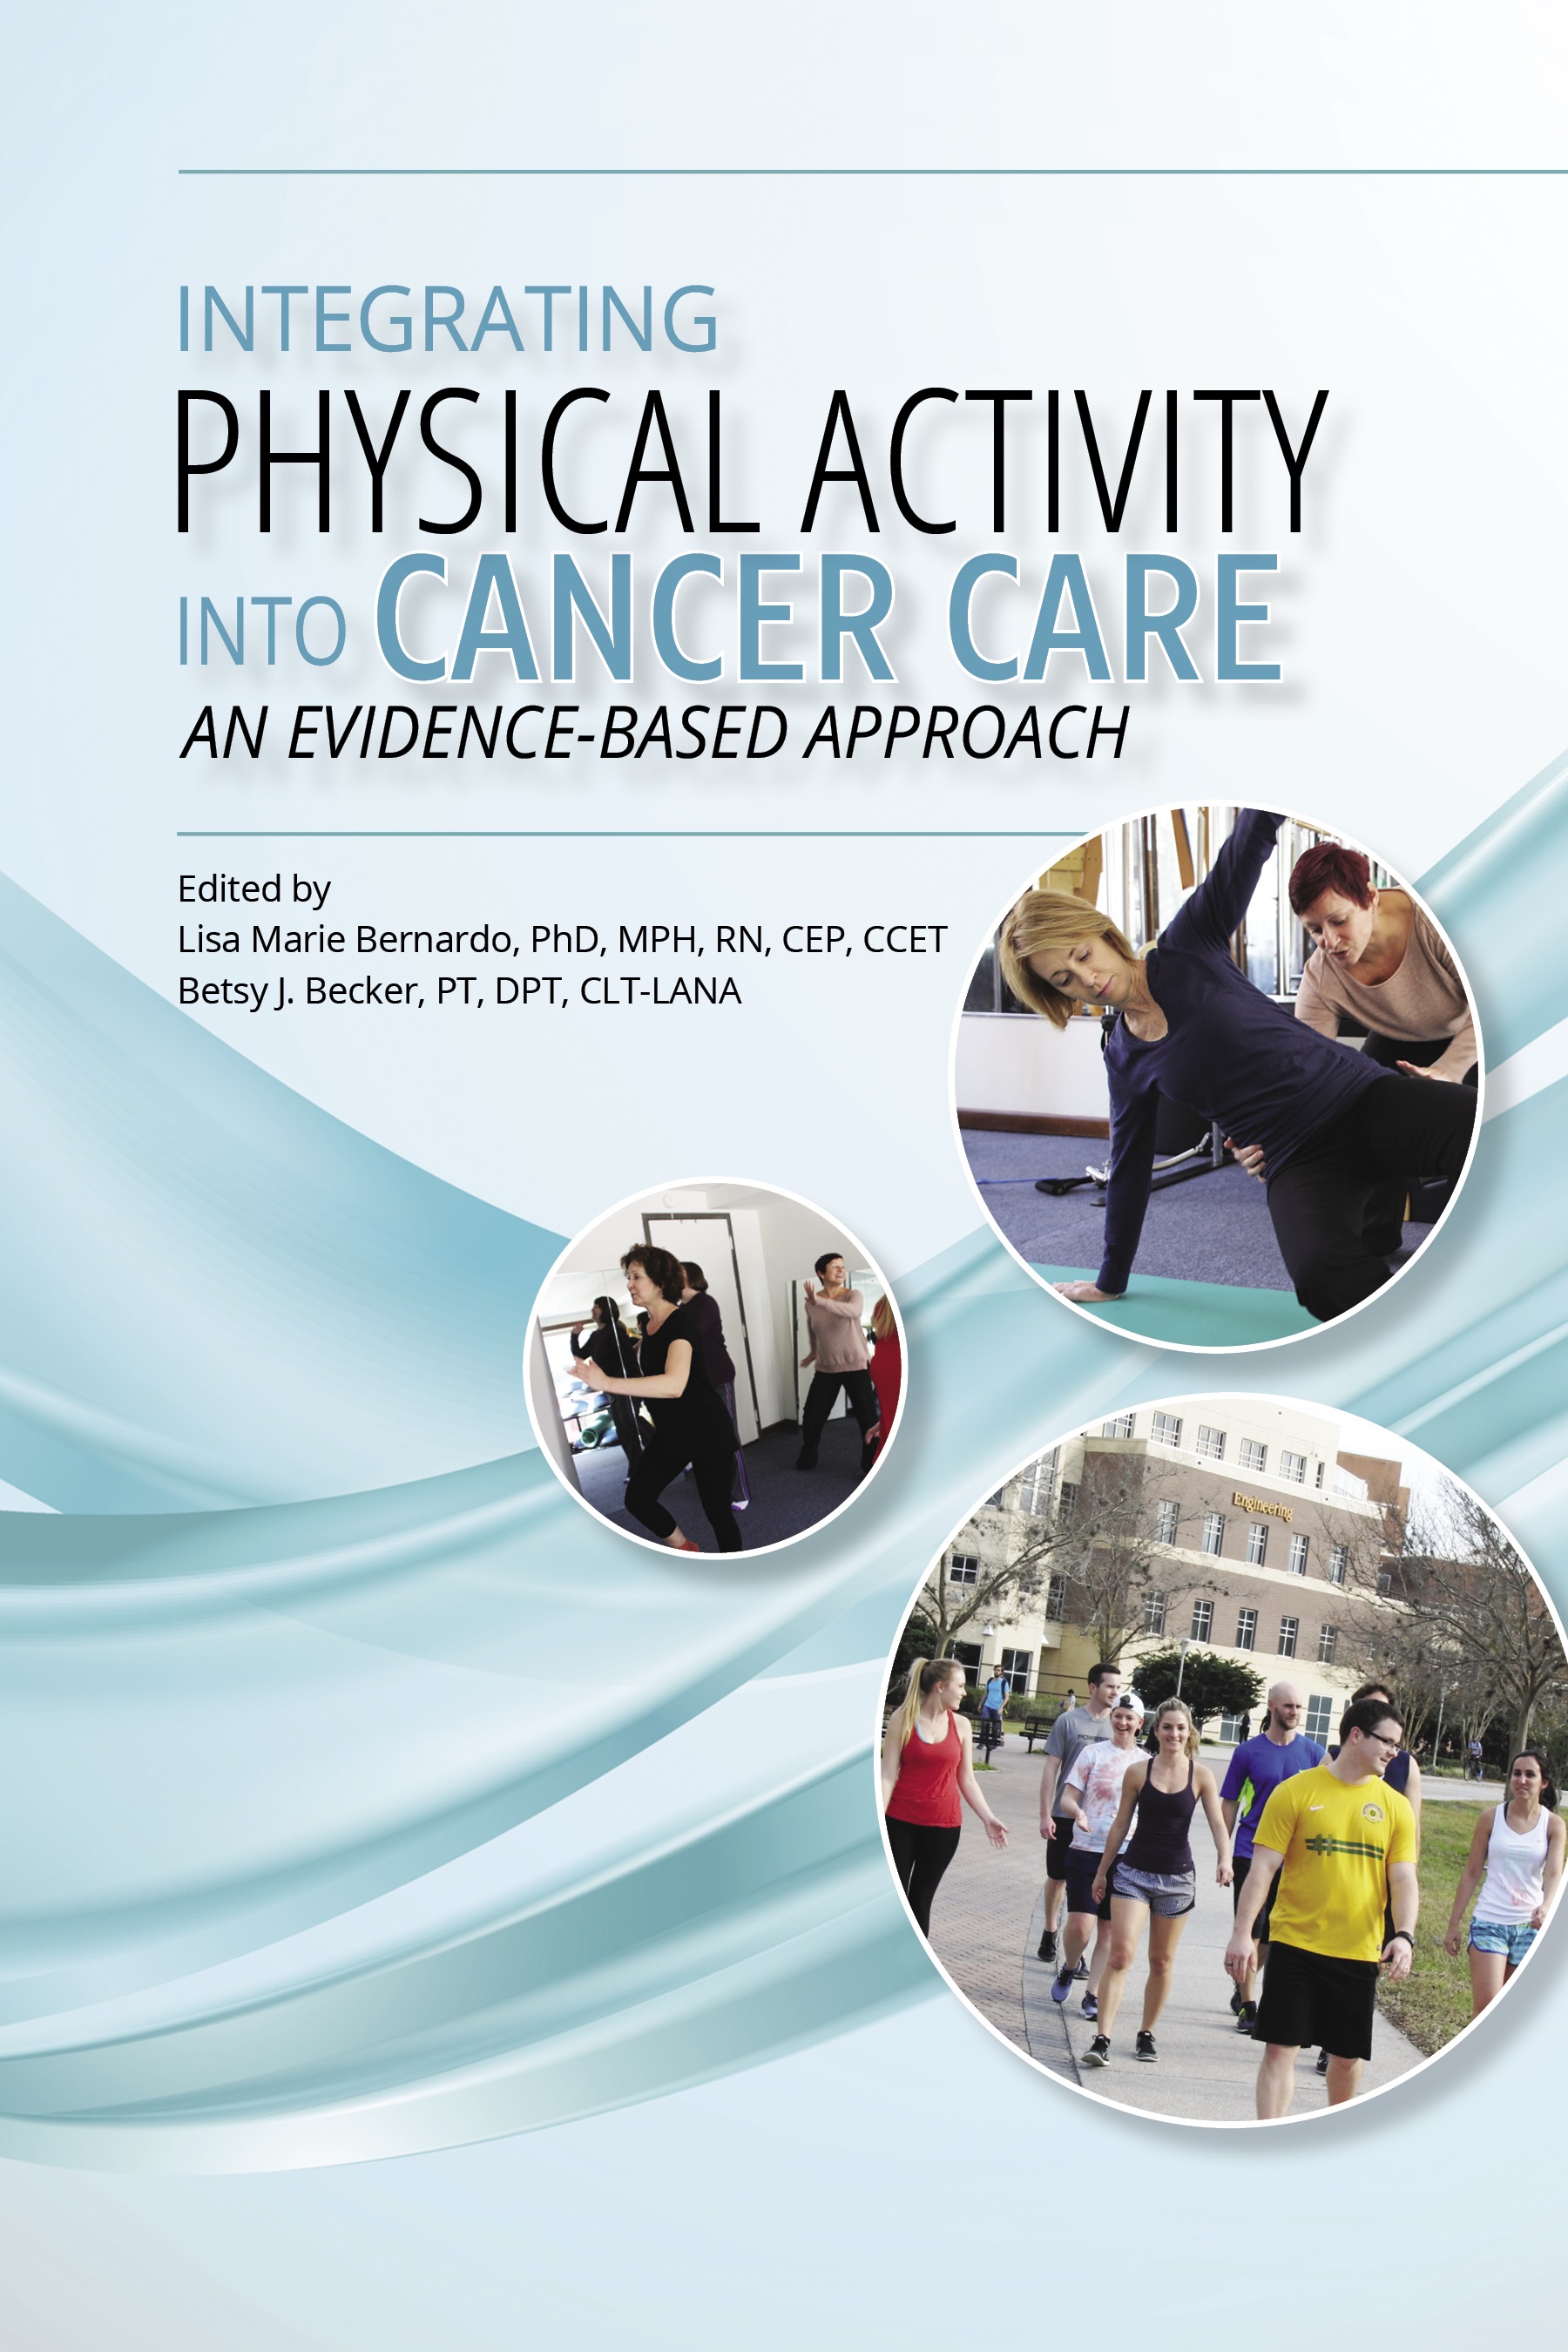 Integrating Physical Activity Into Cancer Care: An Evidence-Based Approach